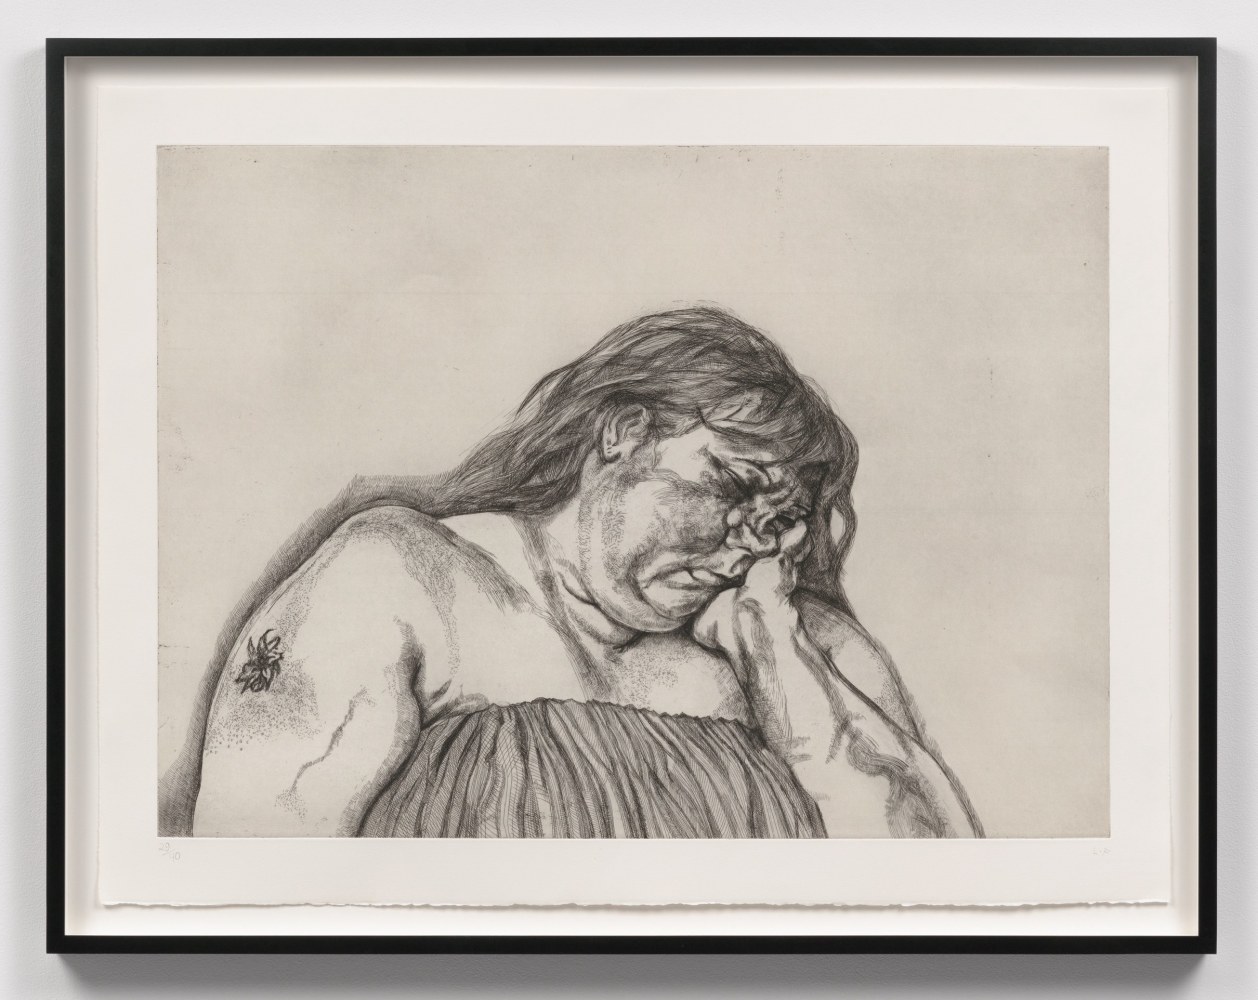 An etching of a woman with a singular upper arm tattoo by Lucian Freud